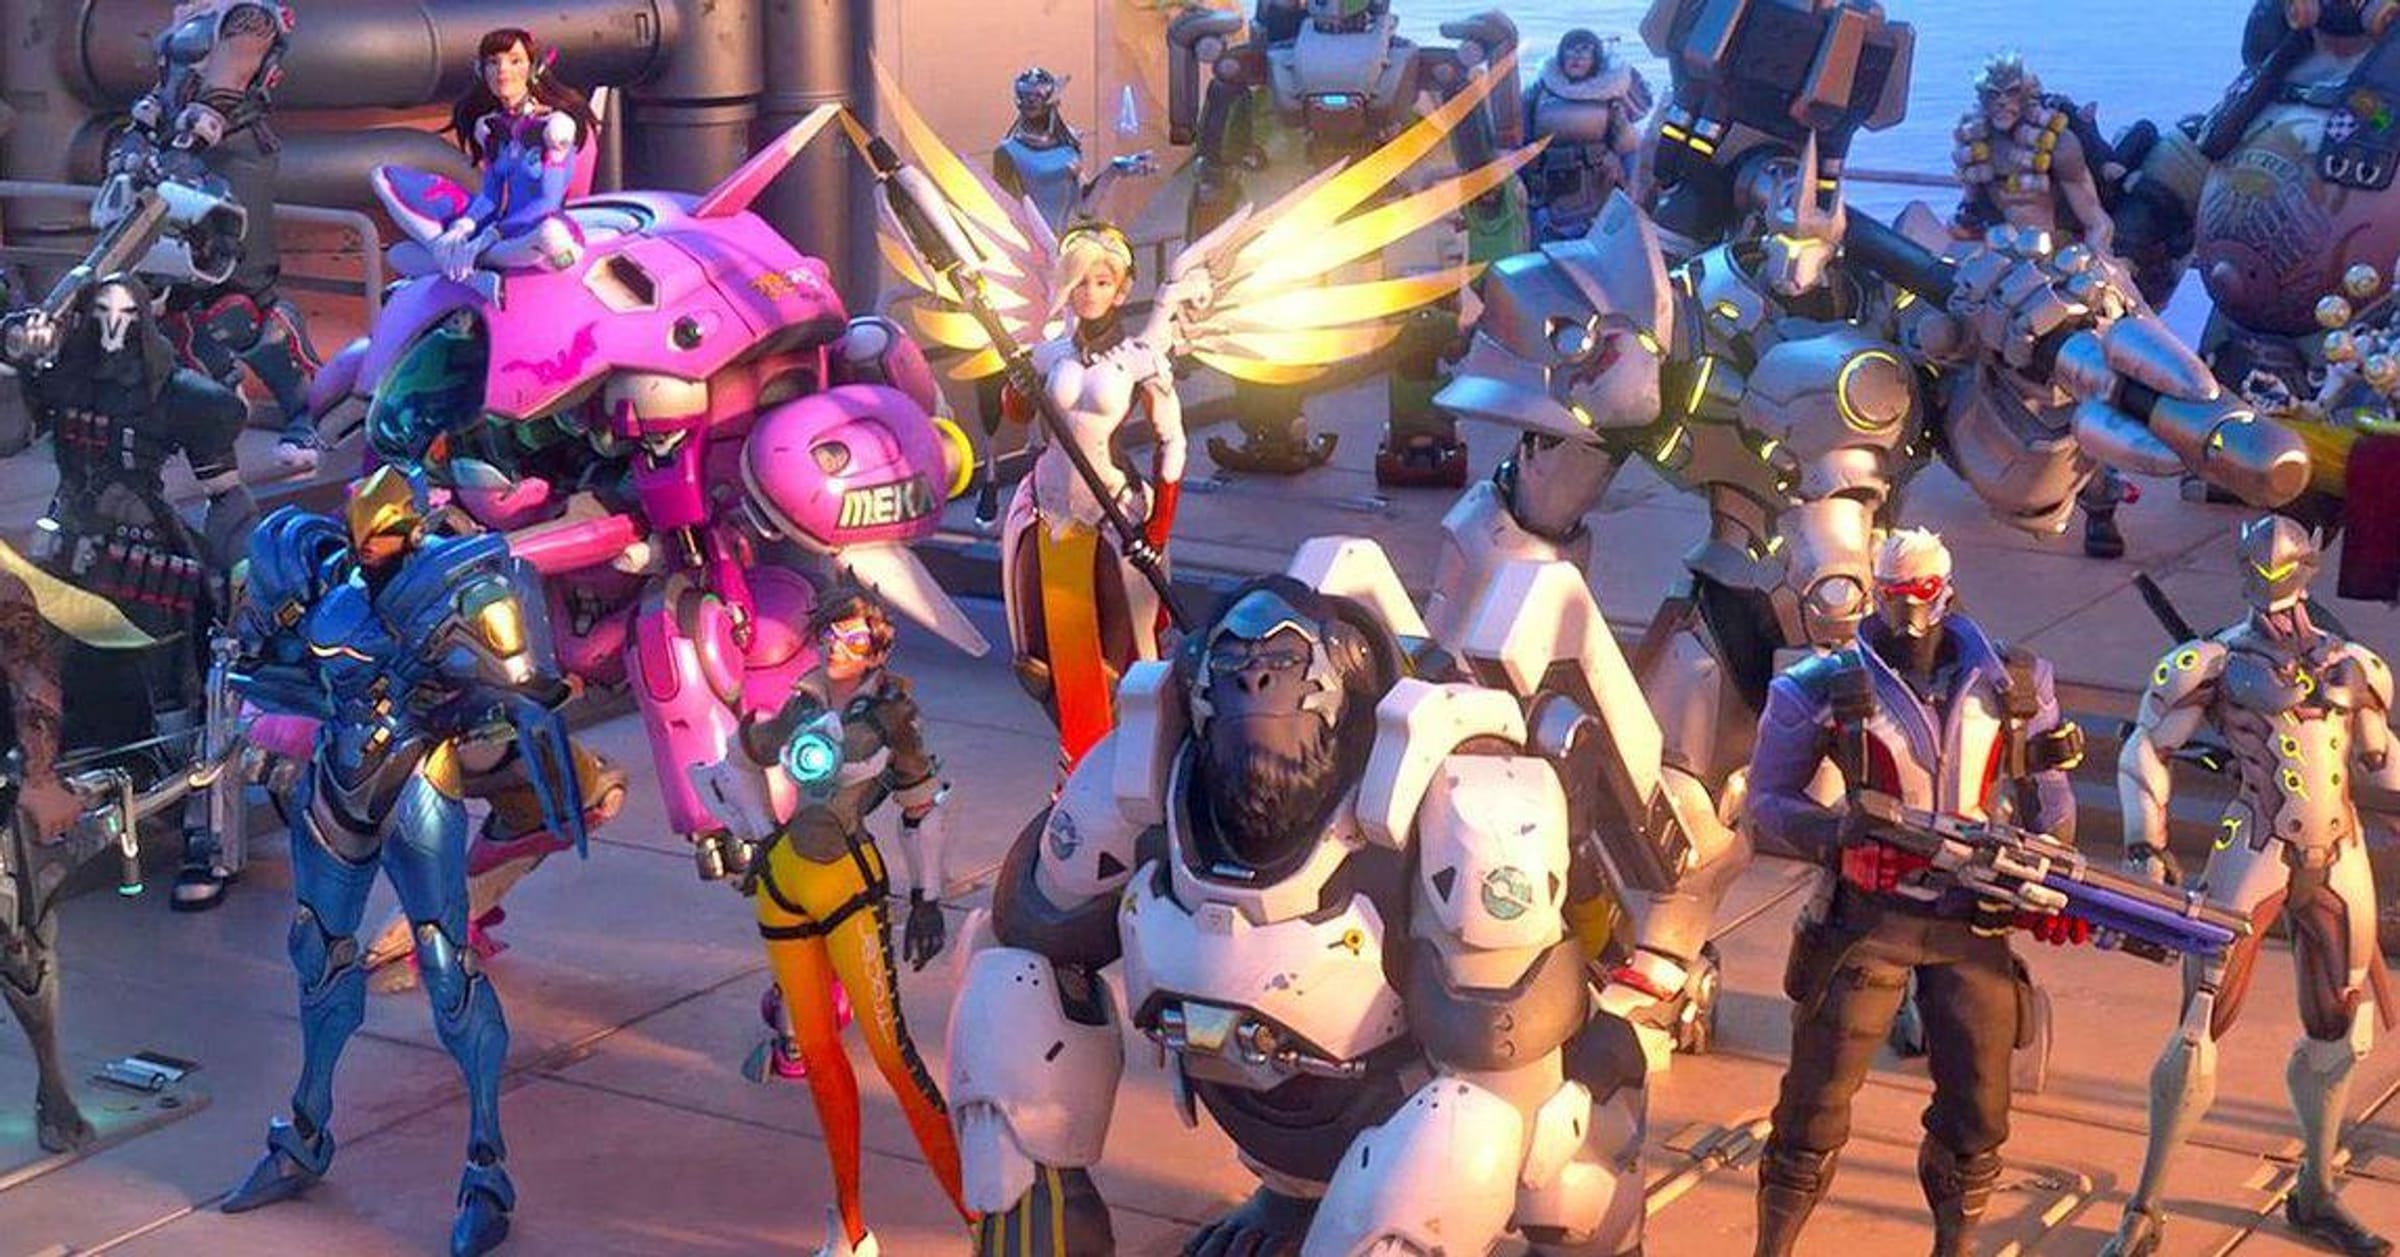 Overwatch: Every Playable Character's Age, Height, And Birth Year